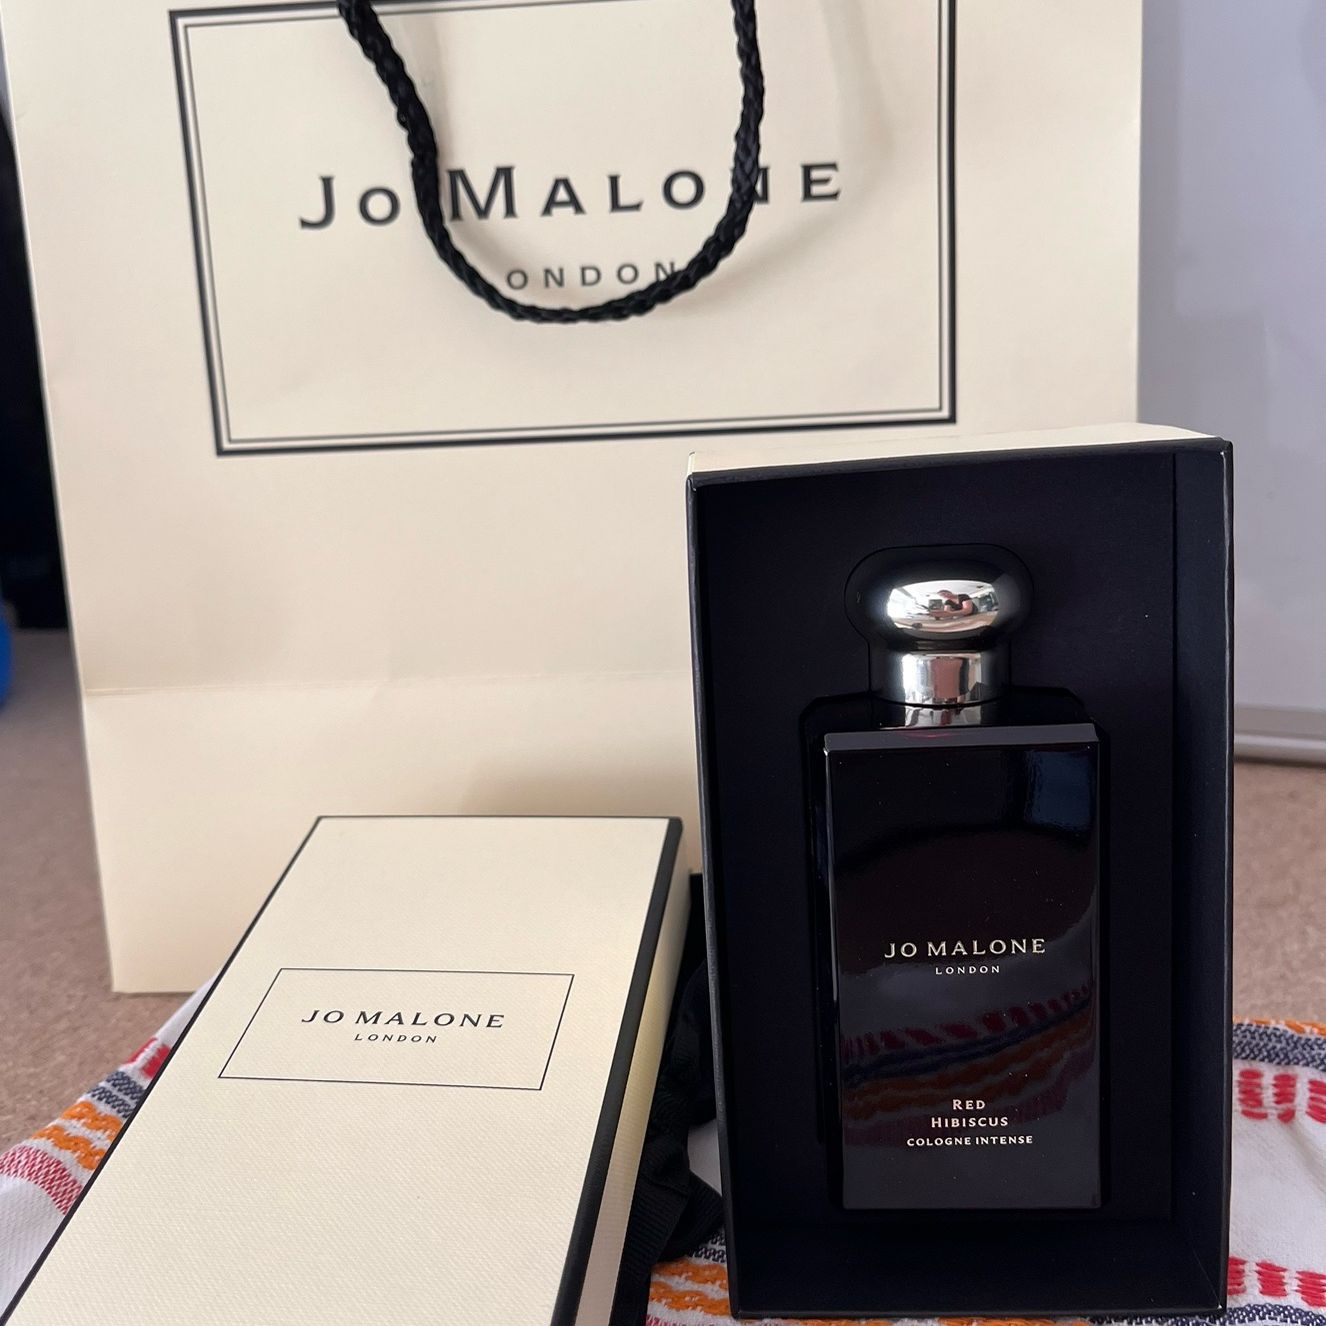 Jo Malone women’s cologne “Hibiscus”  Mother’s Day gift?